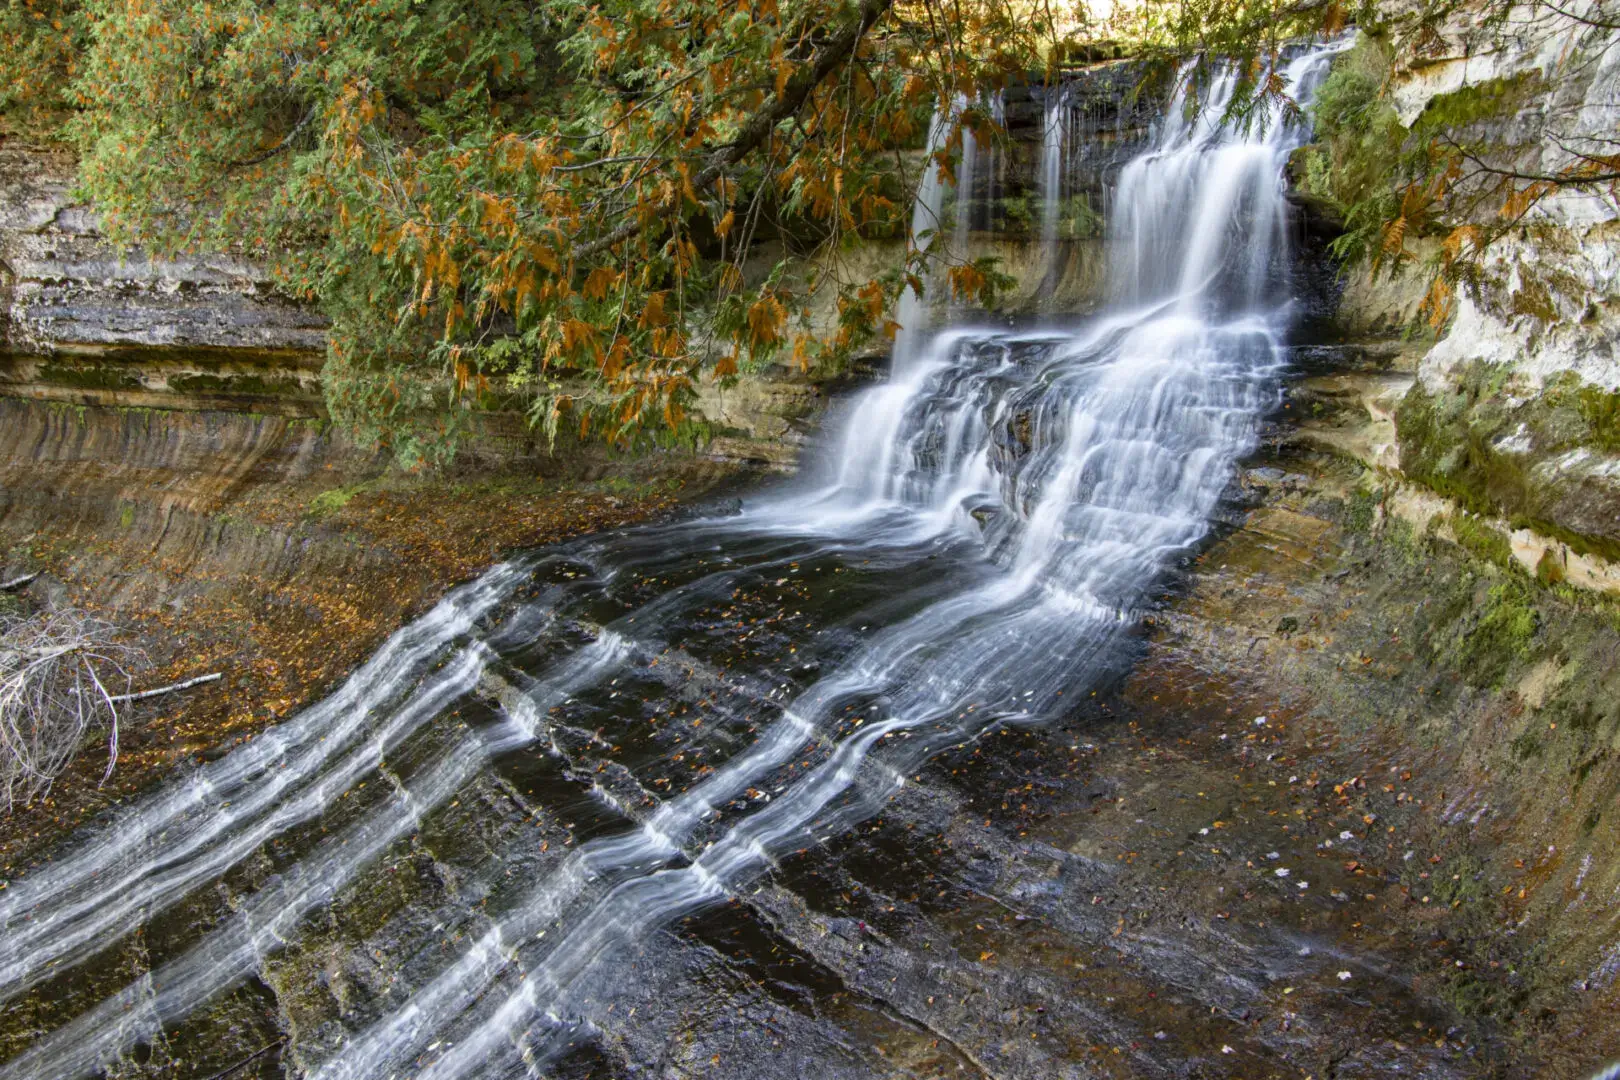 A waterfall in a wooded area with trees in the background.